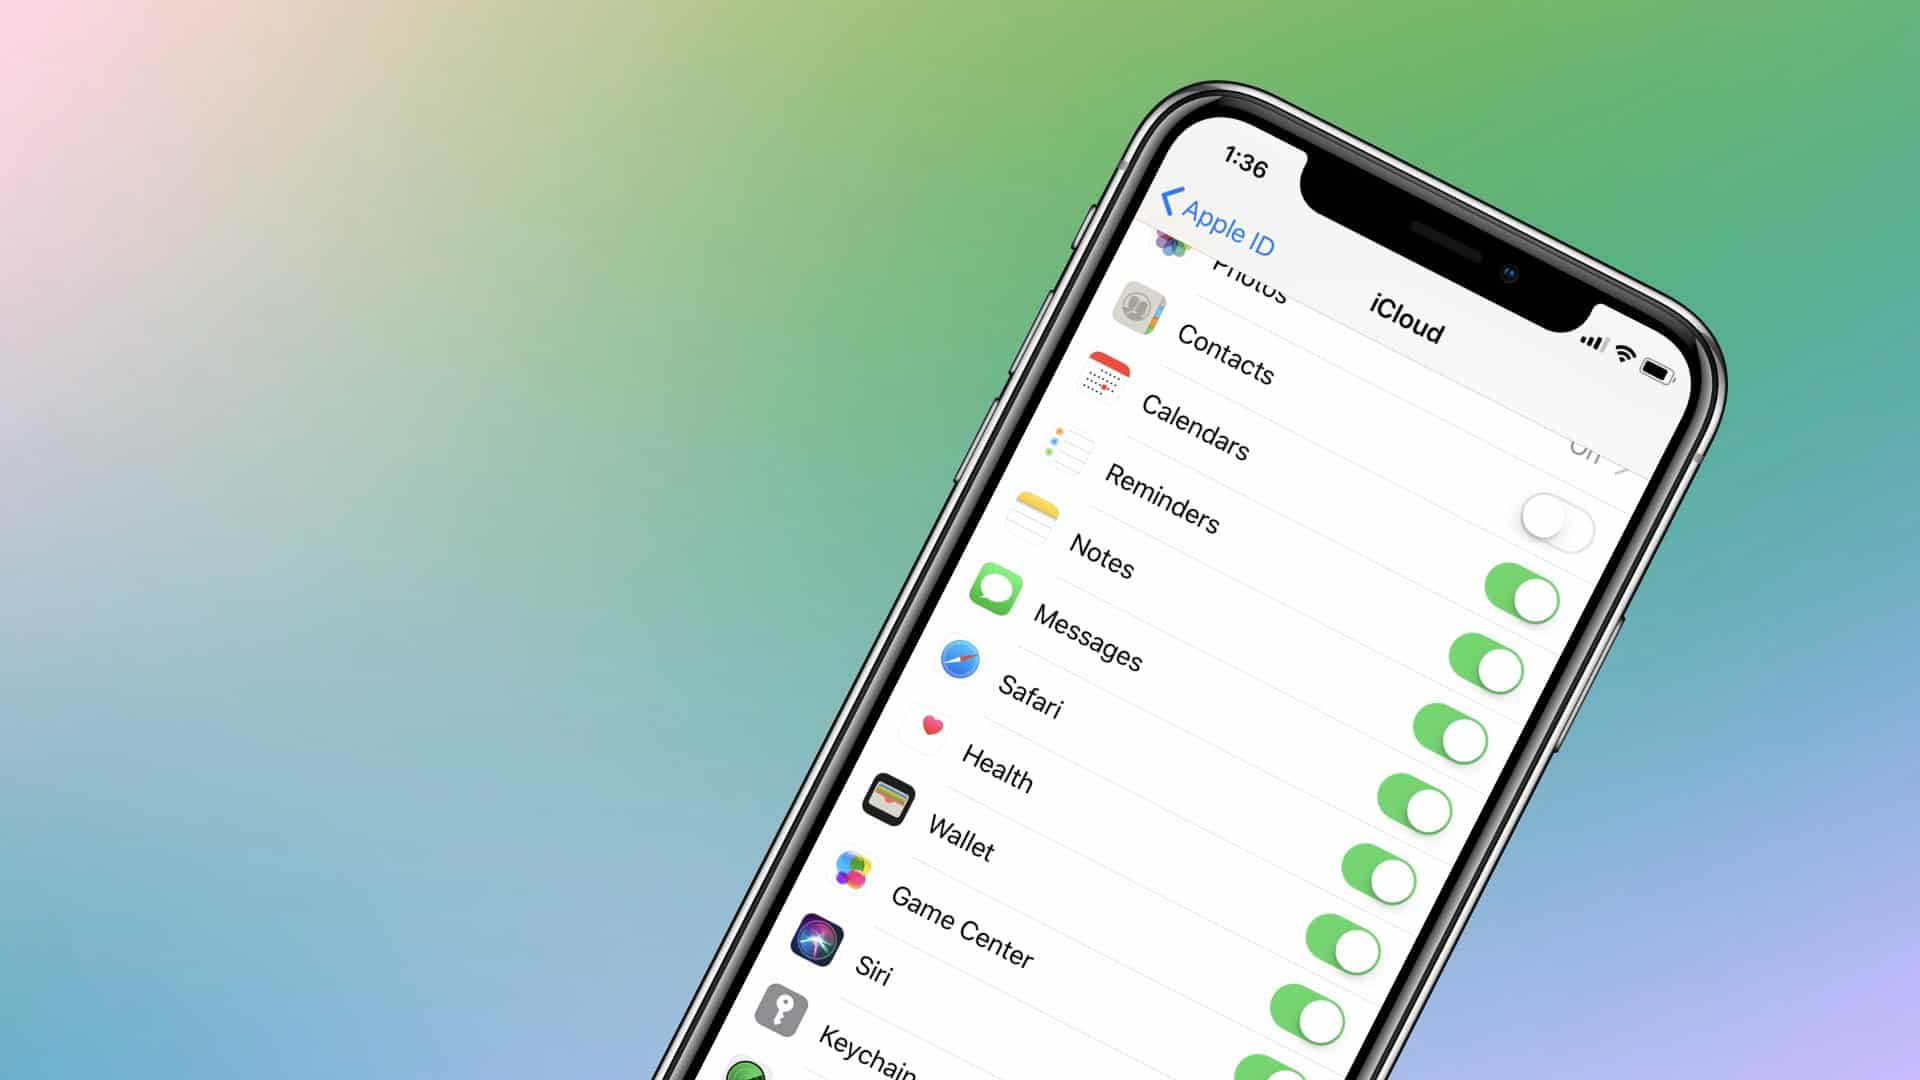 Messages not showing in iCloud settings on iOS 11.4? Here's how to fix it